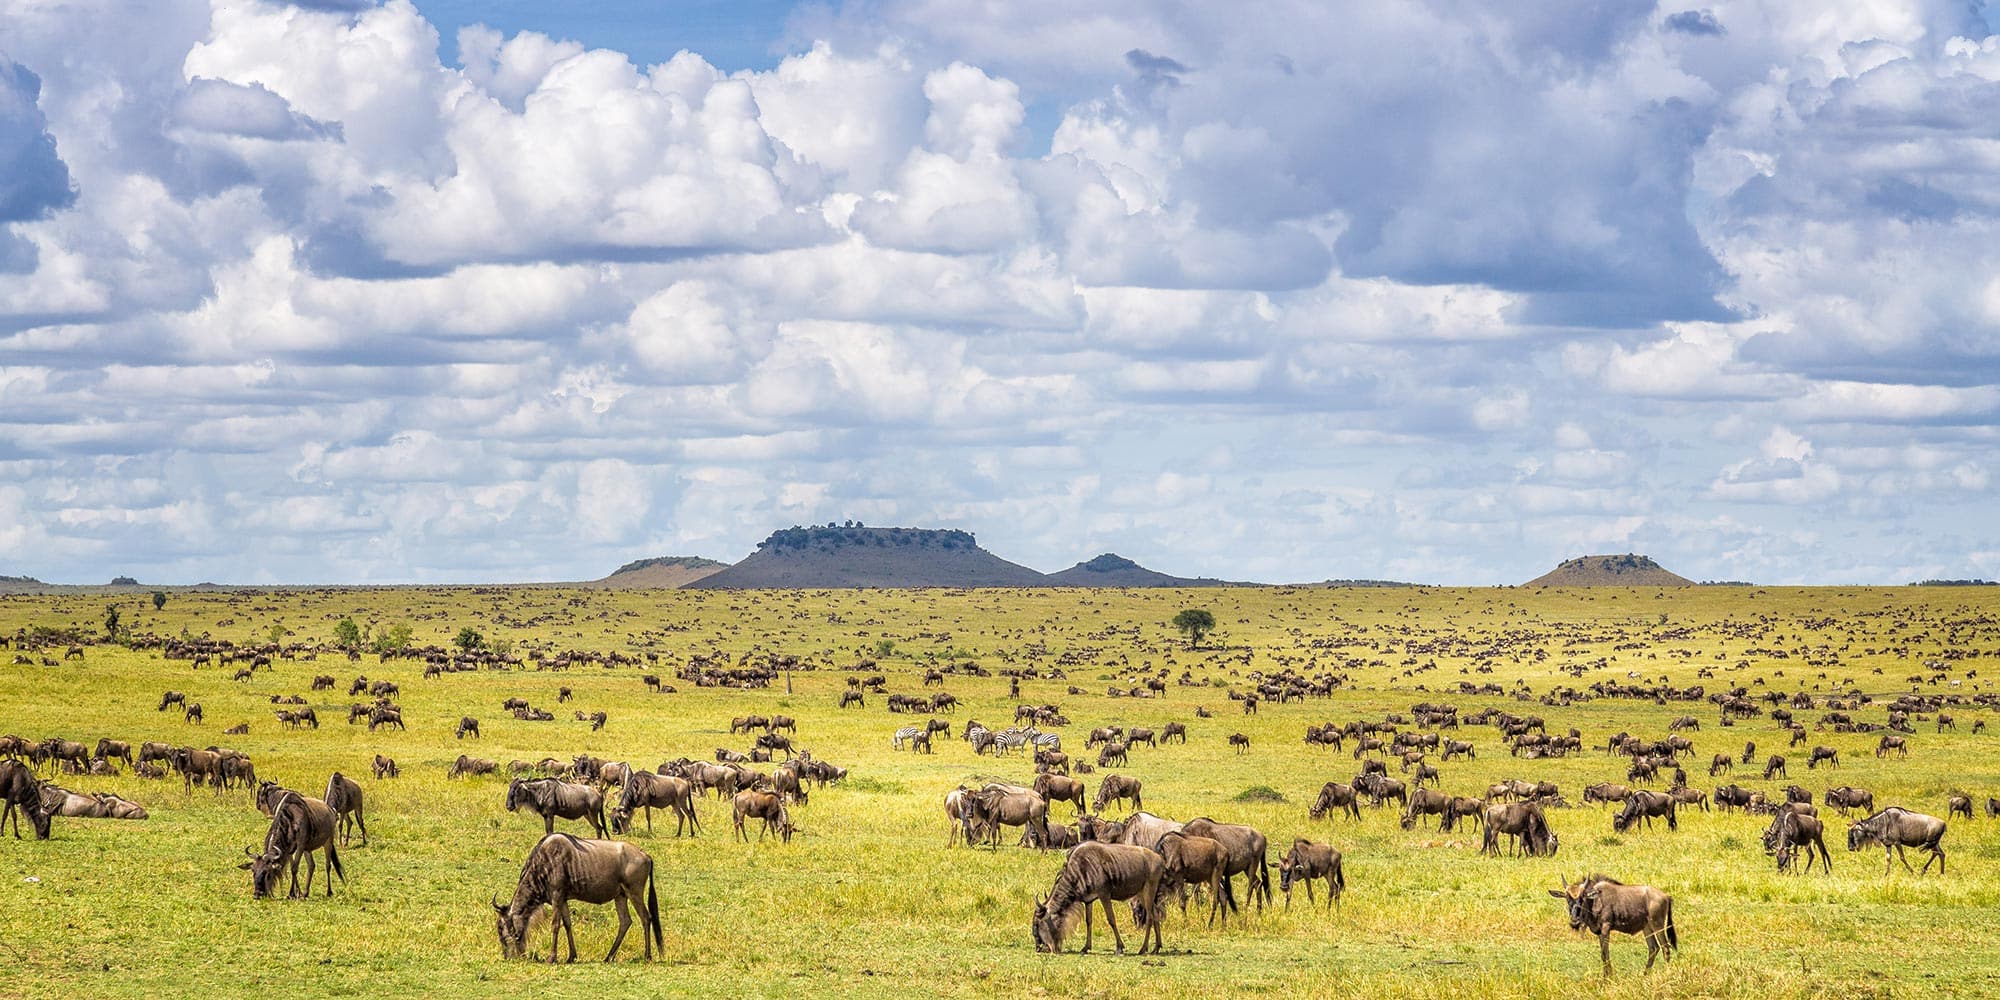 Wildebeest viewing during one of the best times to visit Tanzania